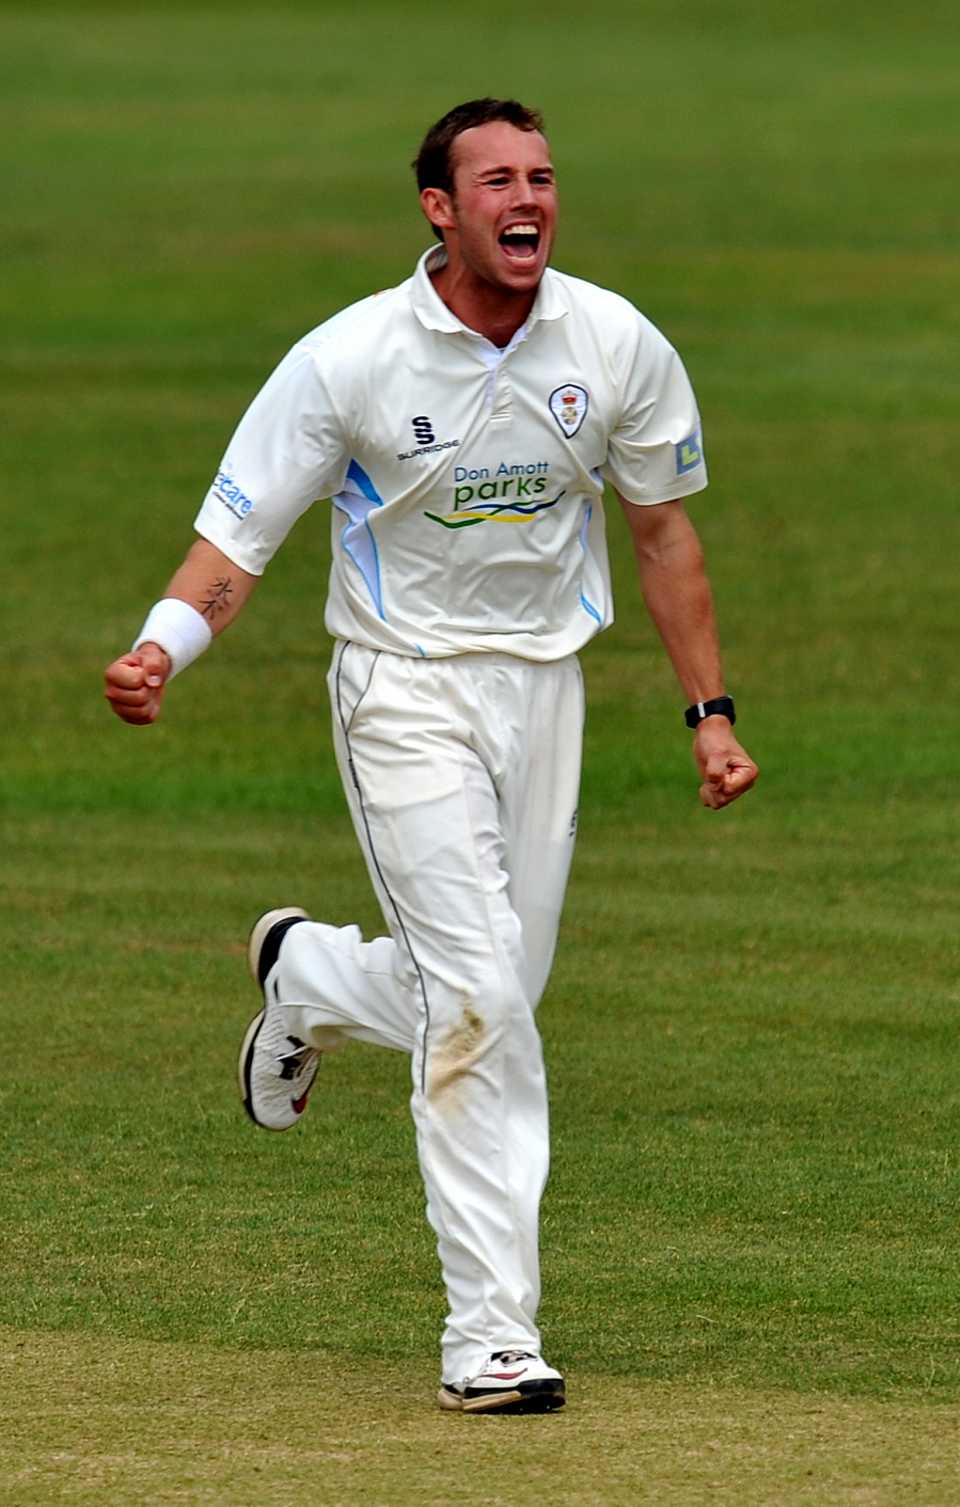 Tony Palladino bowled Derbyshire to victory with 5 for 50